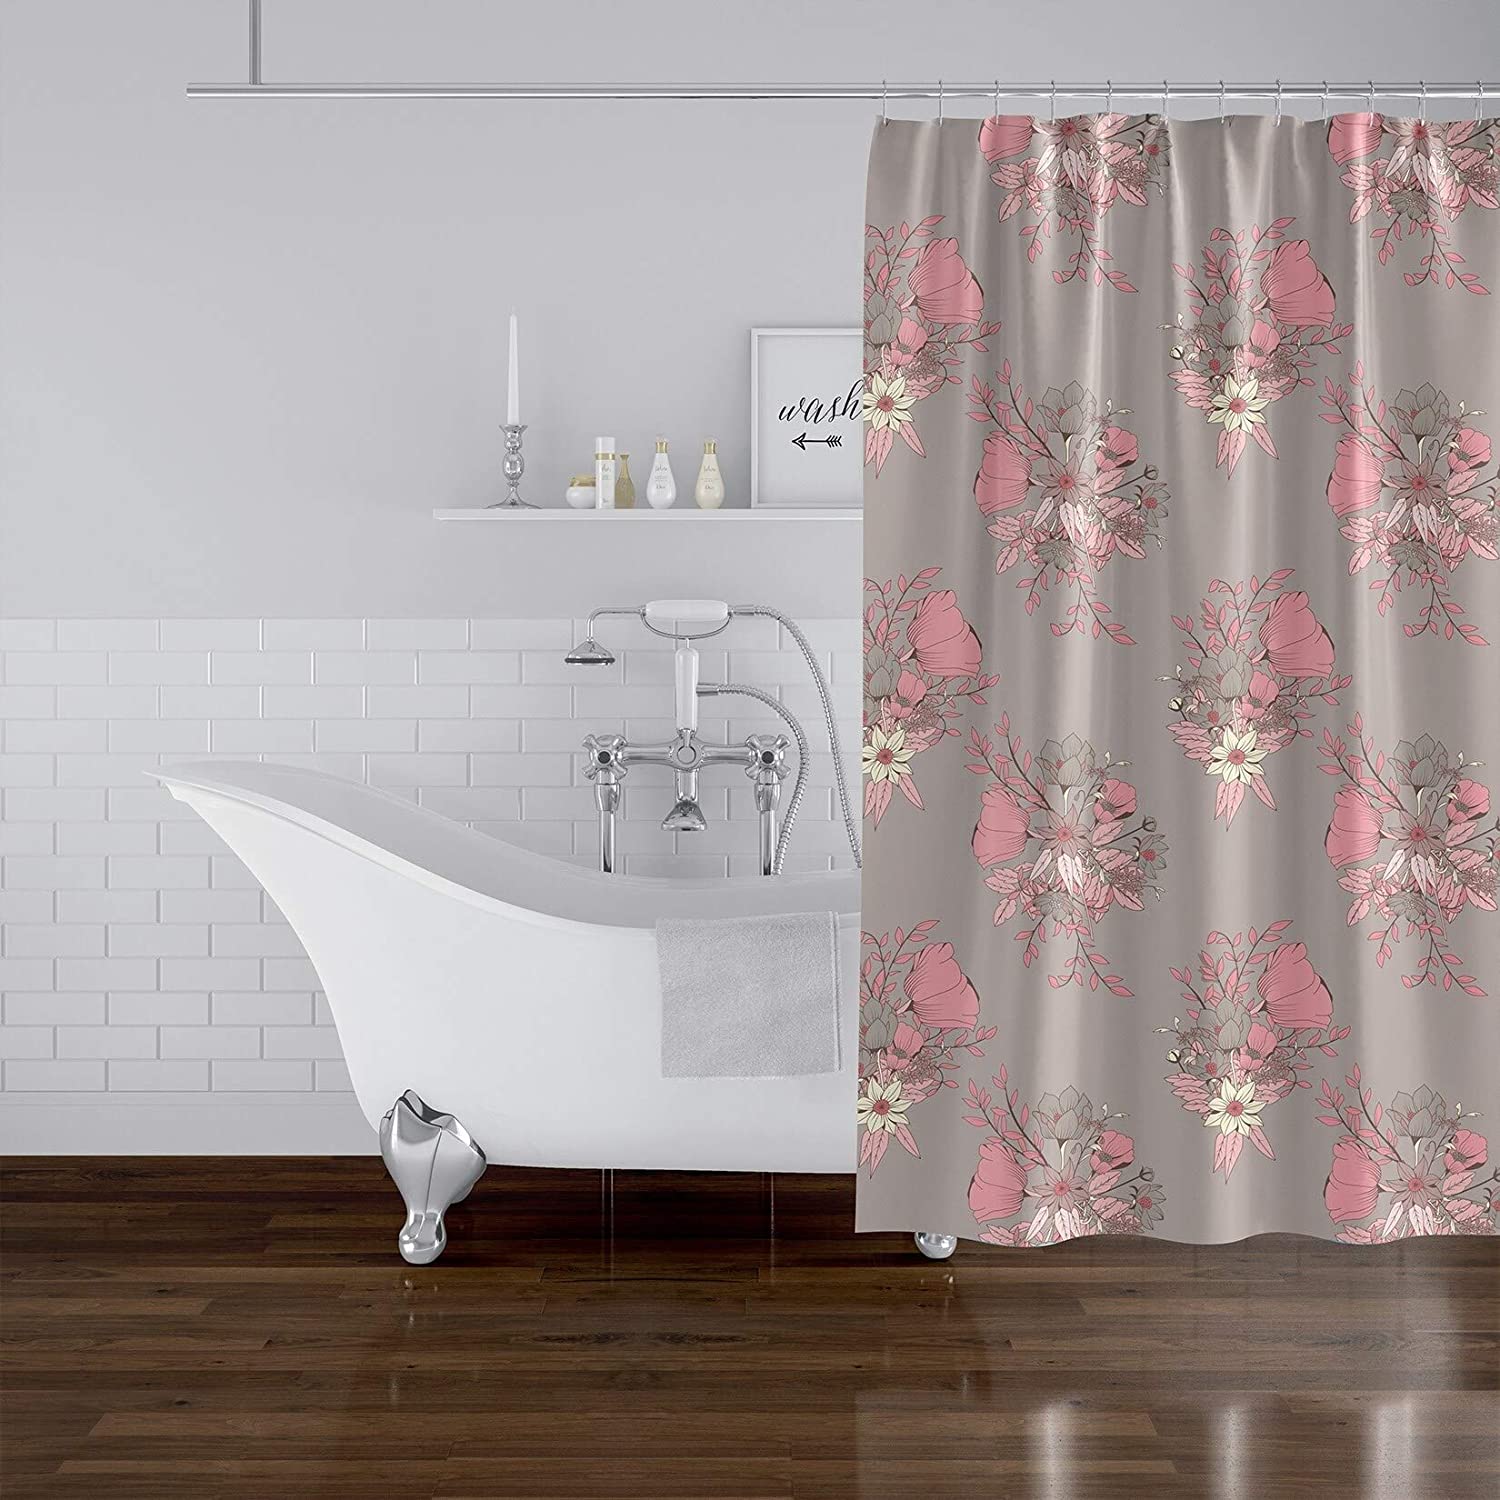 MISC Blossom Shower Curtain by 71x74 Pink Floral Cottage Polyester